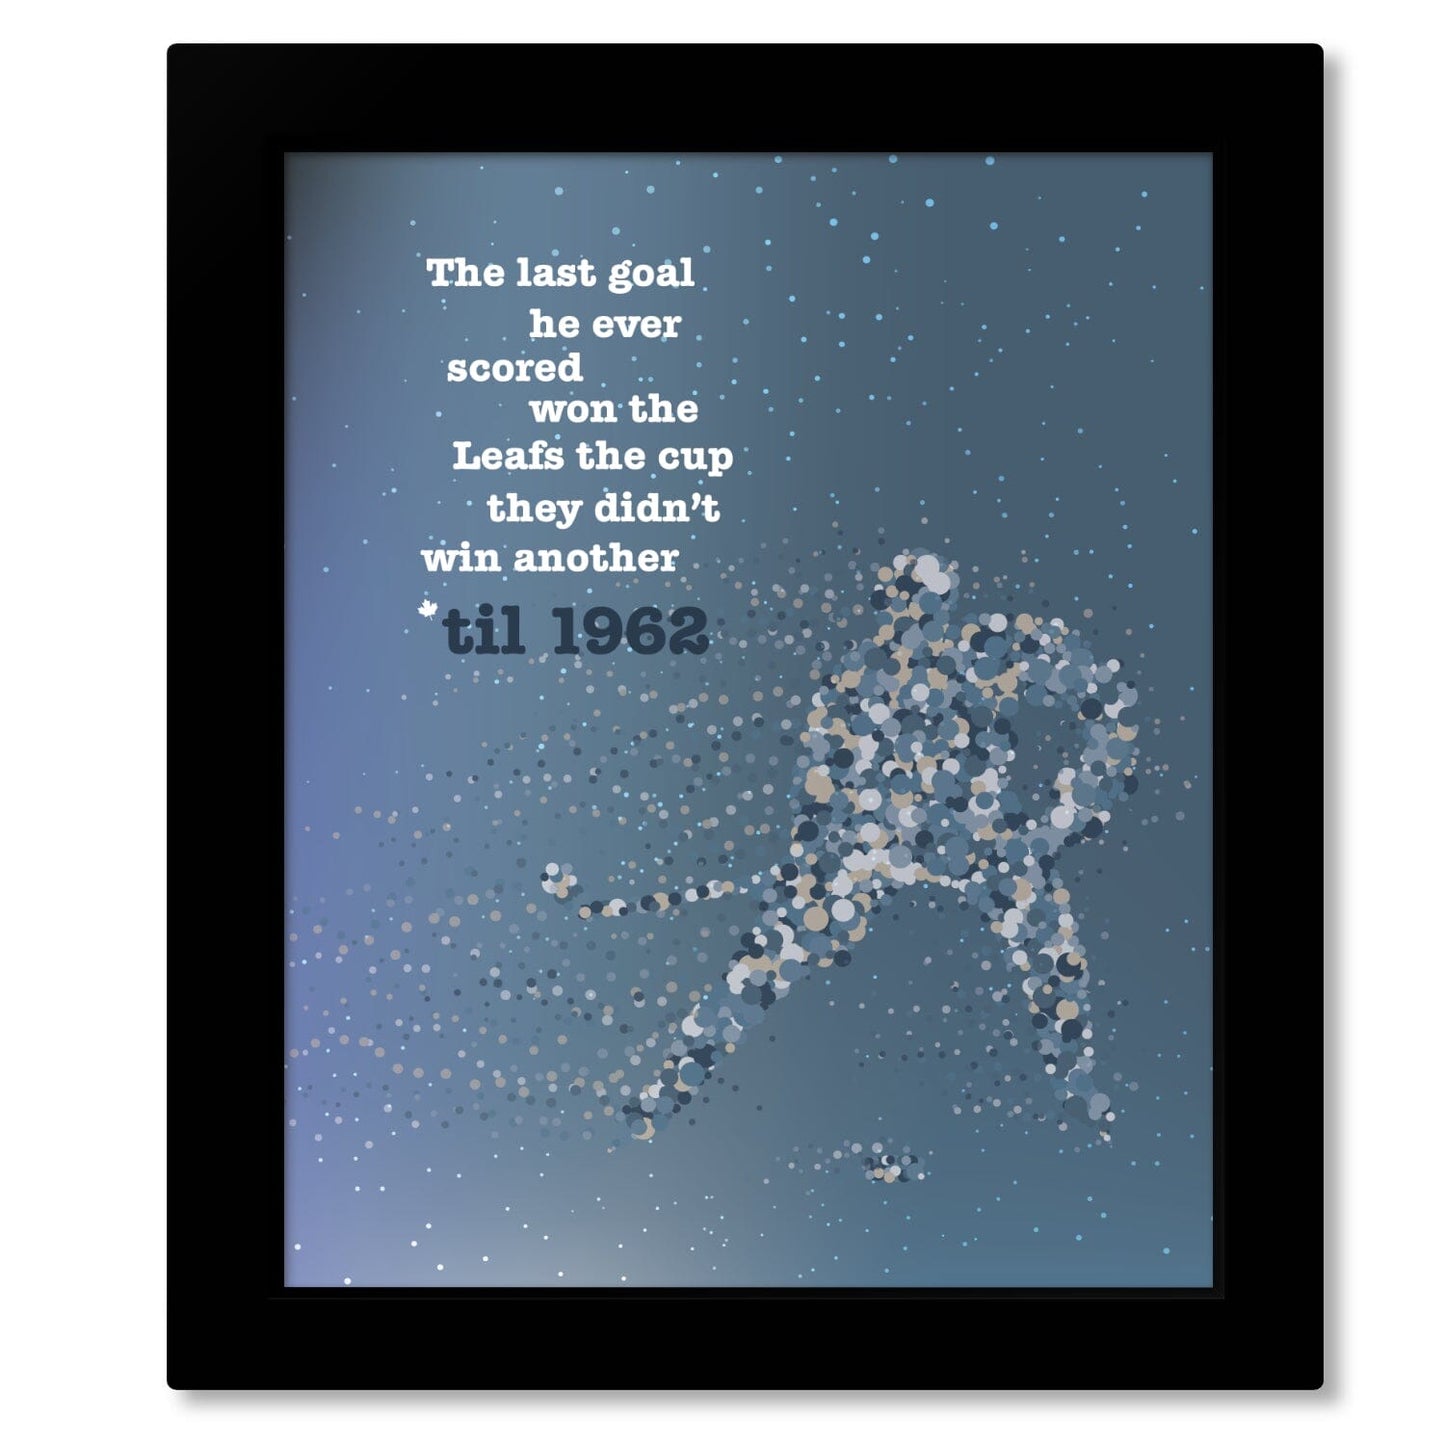 50 Mission Cap by the Tragically Hip - Song Lyric Art Print Song Lyrics Art Song Lyrics Art 8x10 Framed Print (without mat) 